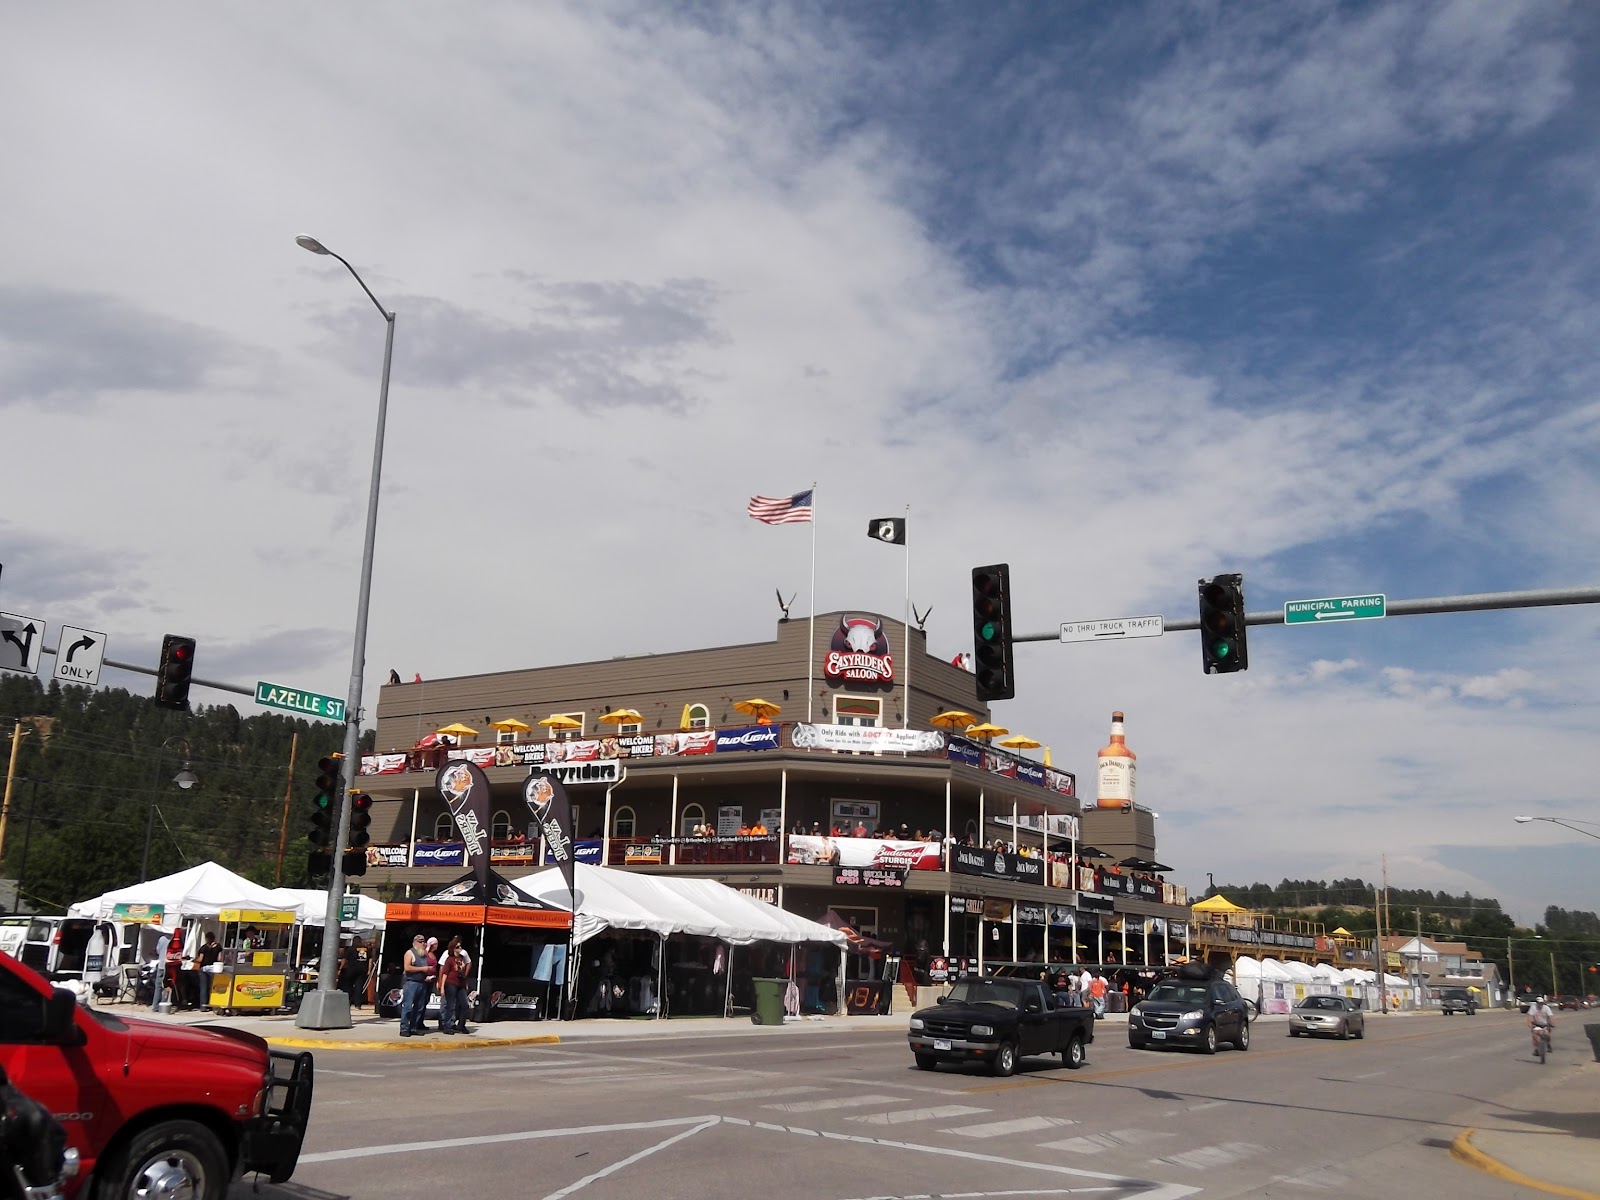 Sturgis 2012: Visiting Sturgis before the crowds!